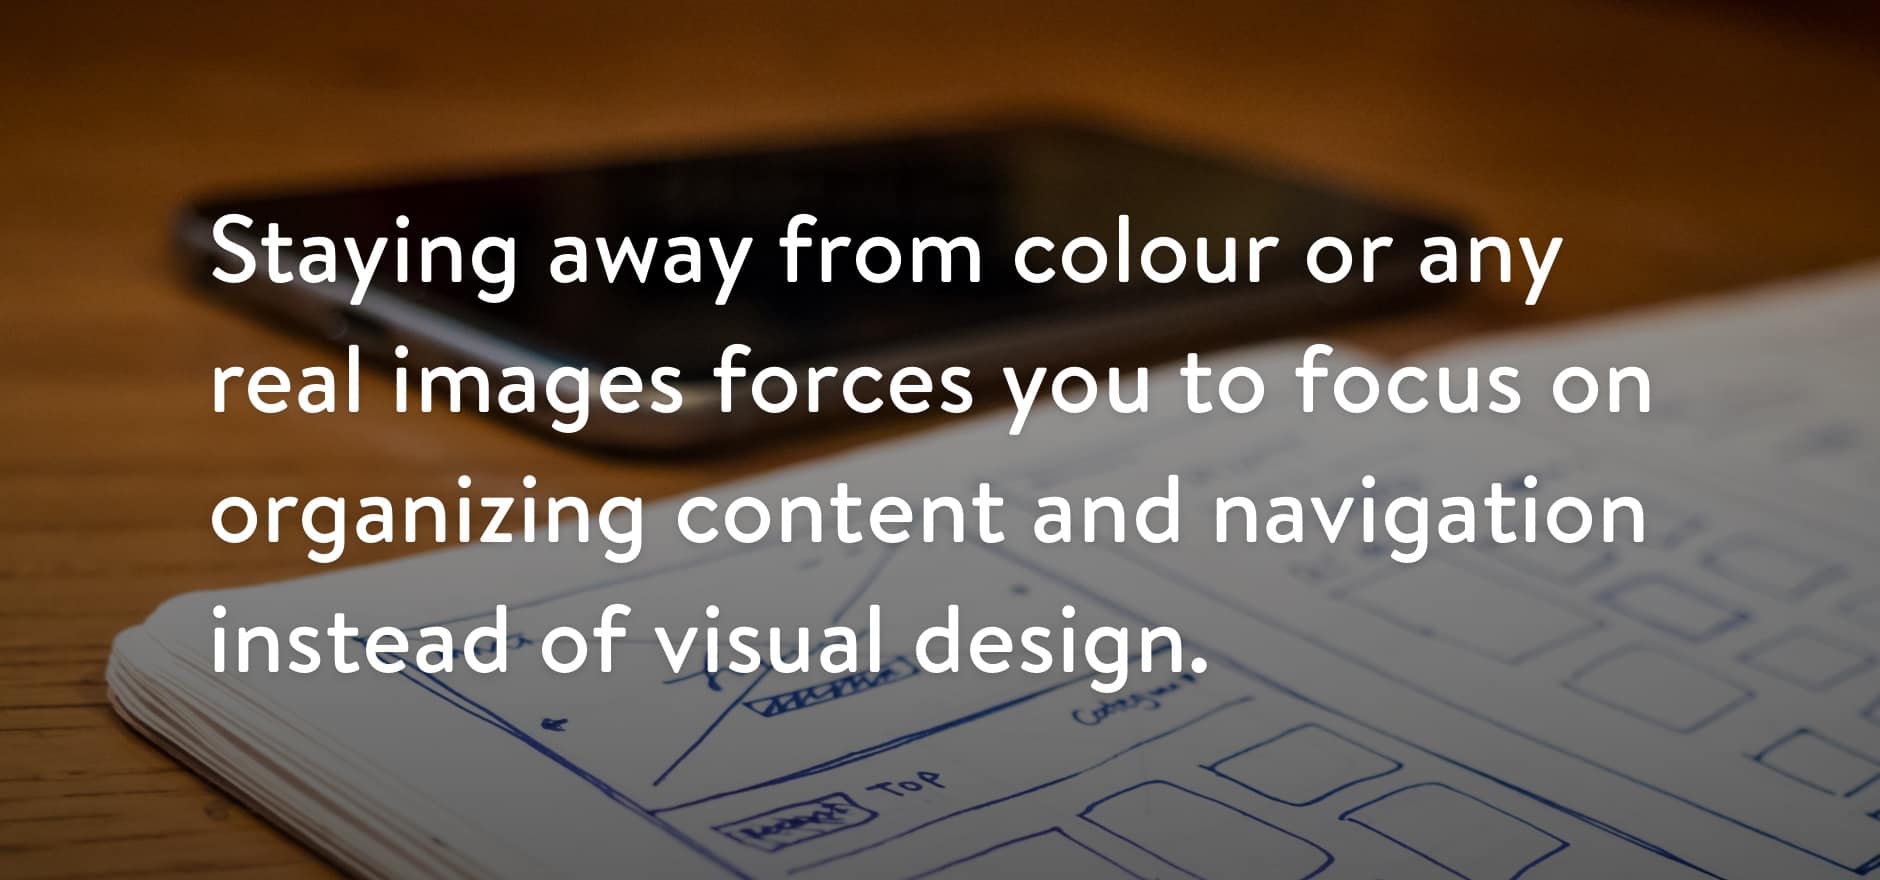 Staying away from colour or any real images forces you to focus on organizing content and navigation instead of visual design.